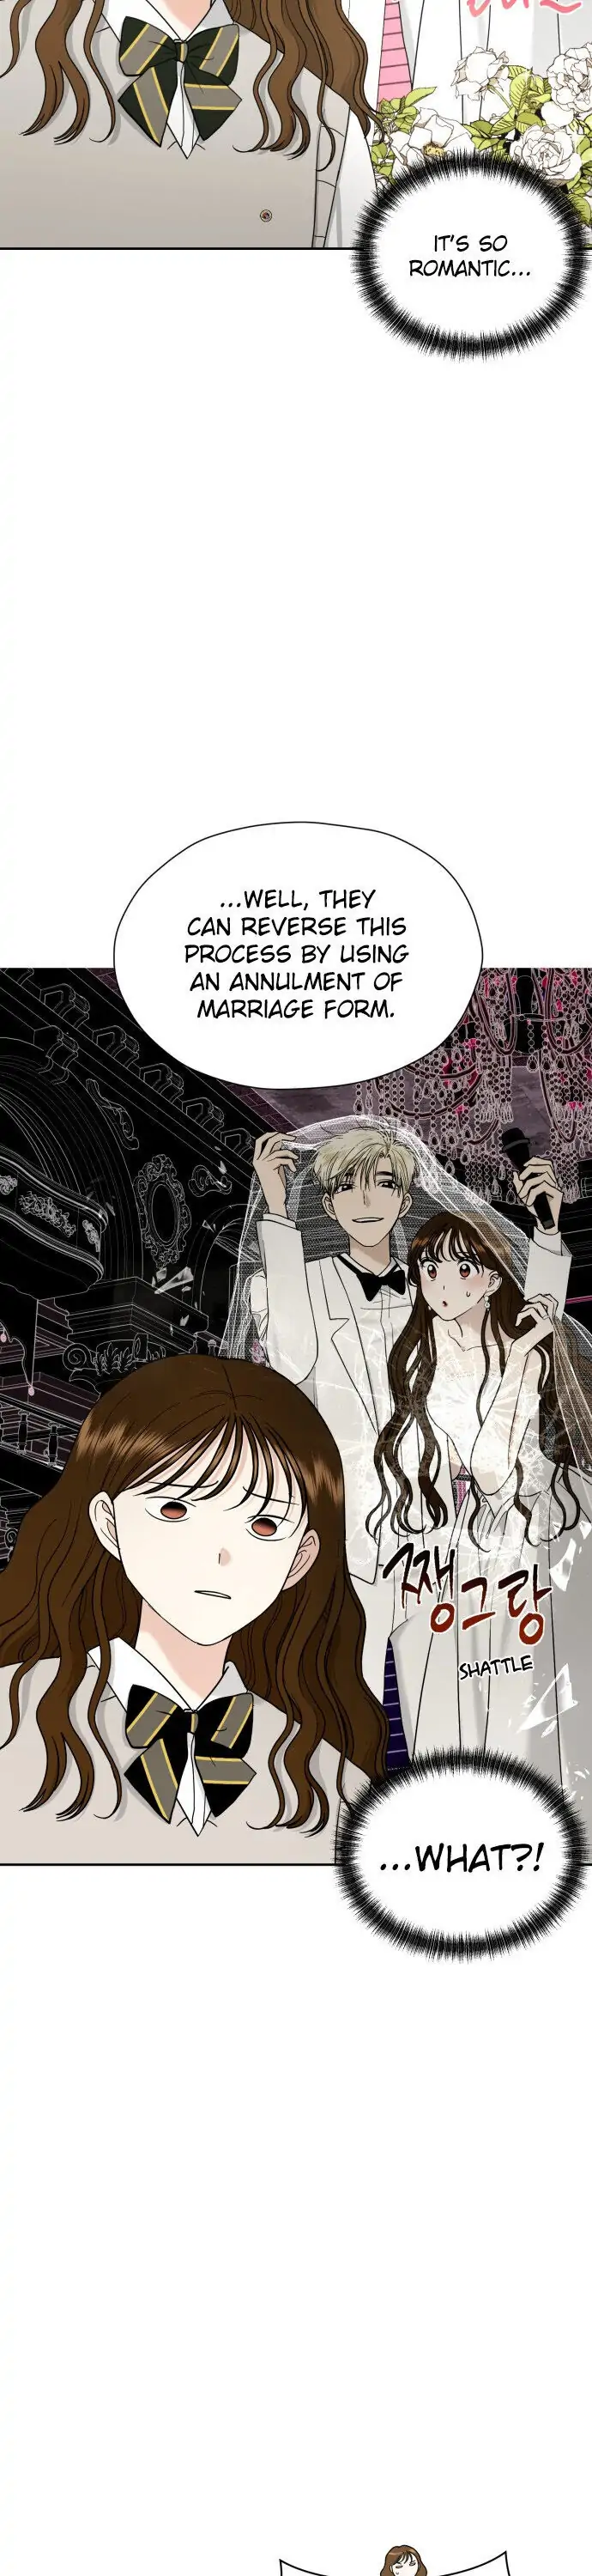 Wedding Delusion chapter 24